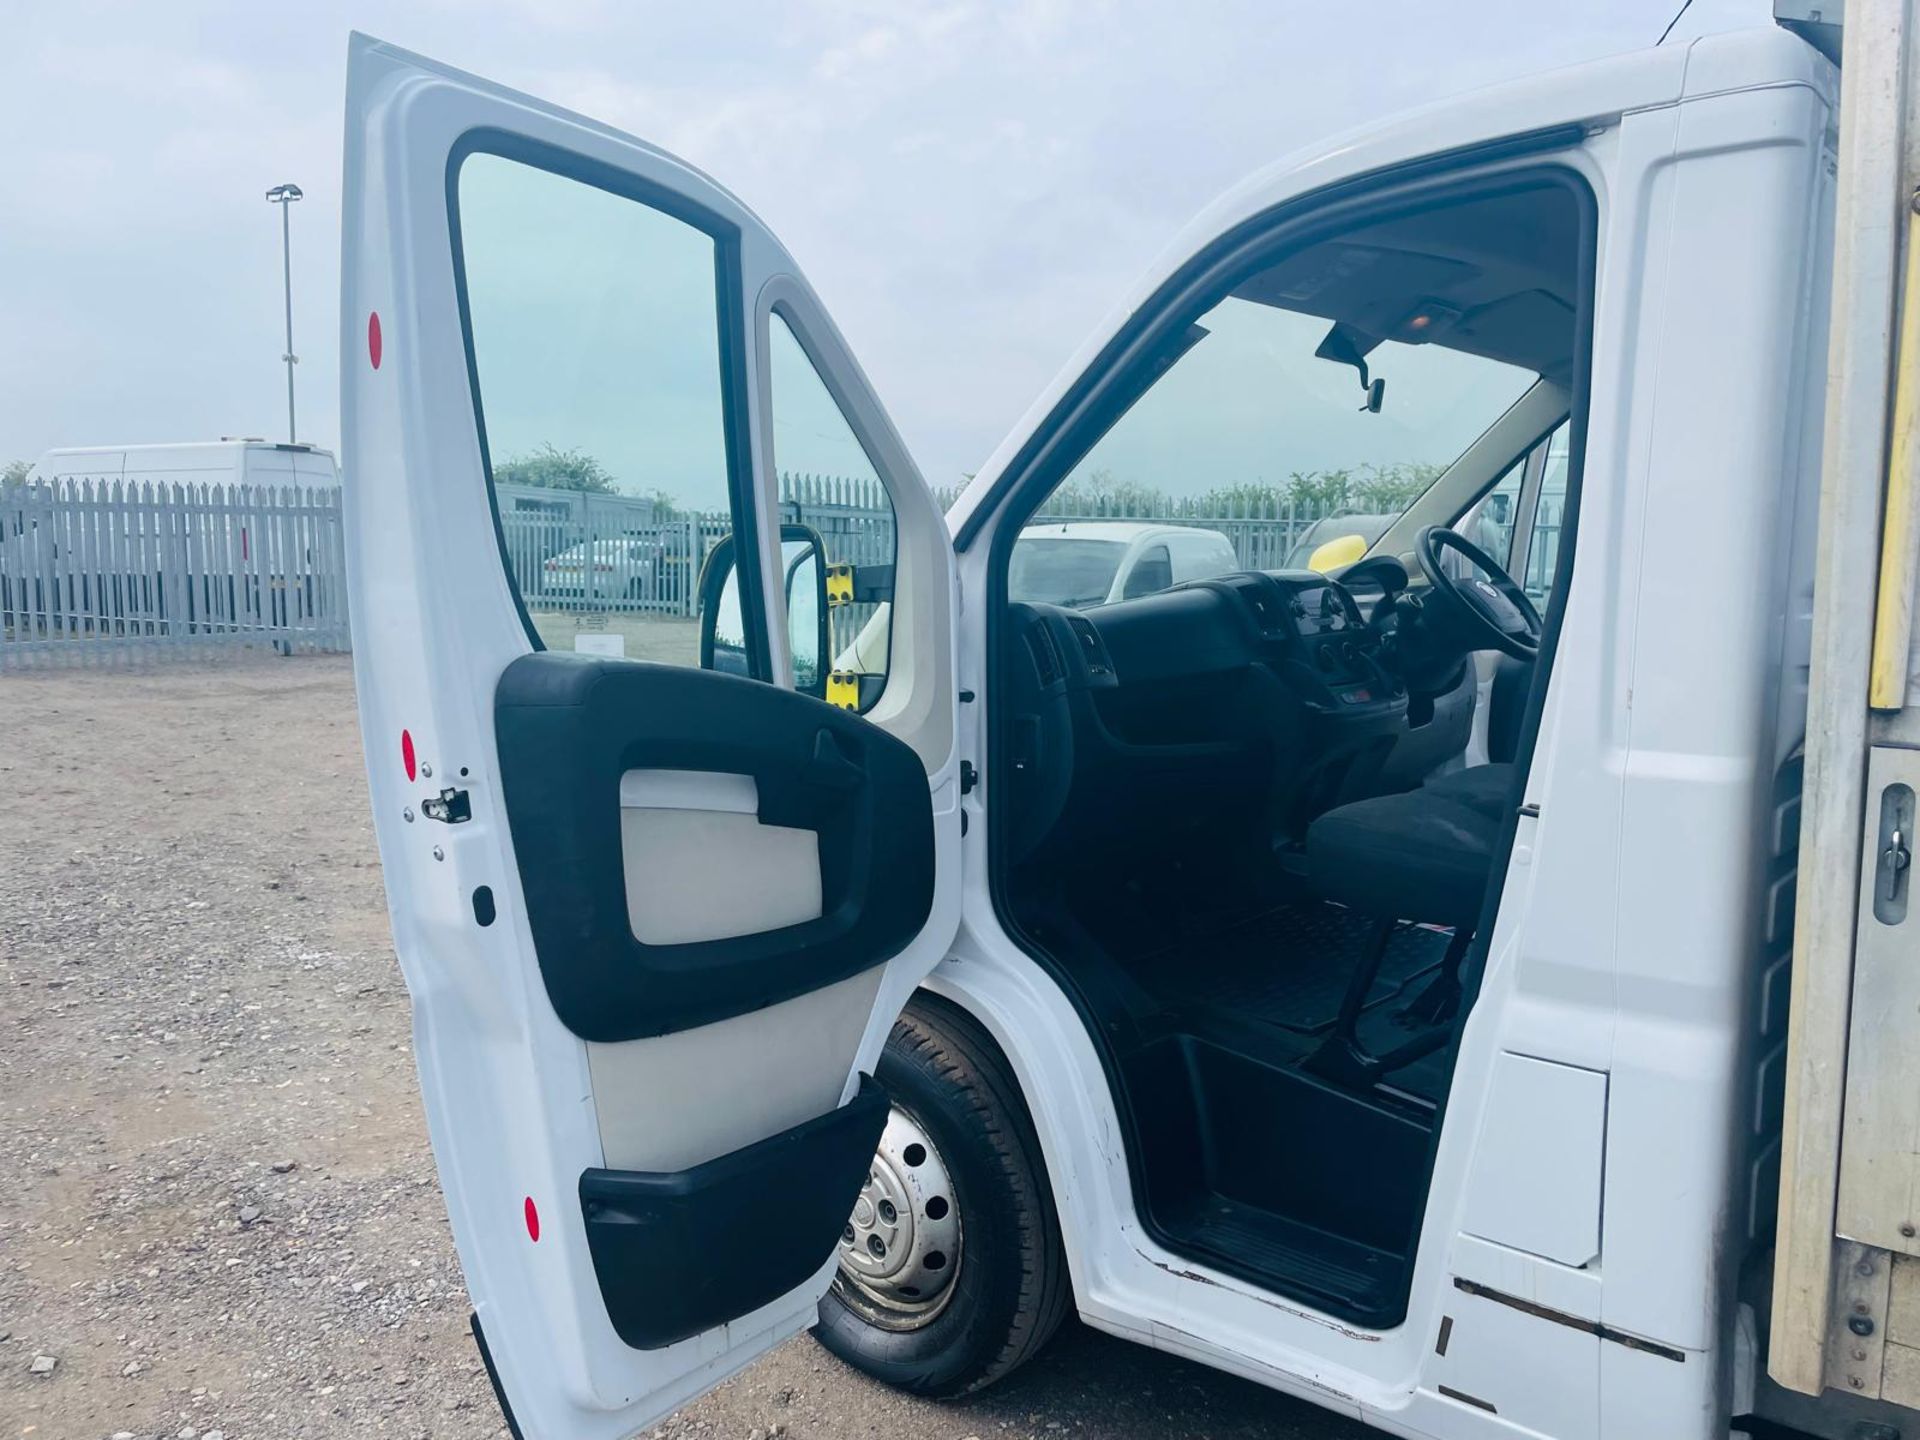 Fiat Ducato 35 Maxi 2.3 MultiJet 130 L3H1 Dropside 2019 '69 Reg'-1 Former keepers - Only 76,029 - Image 24 of 27